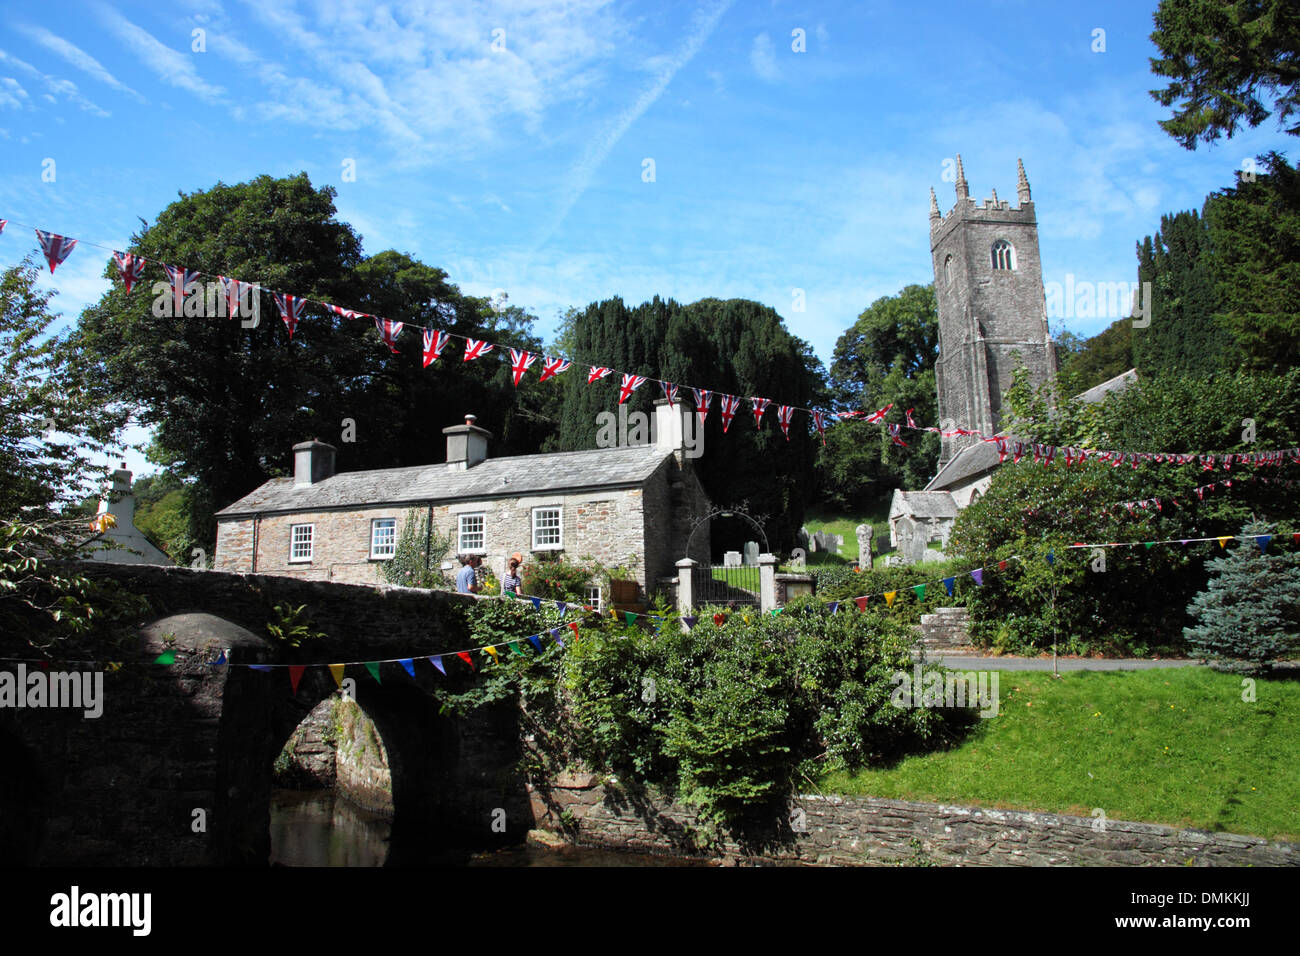 A row of stone cottages with a tall church tower and a bridge under a canopy of trees. Stock Photo